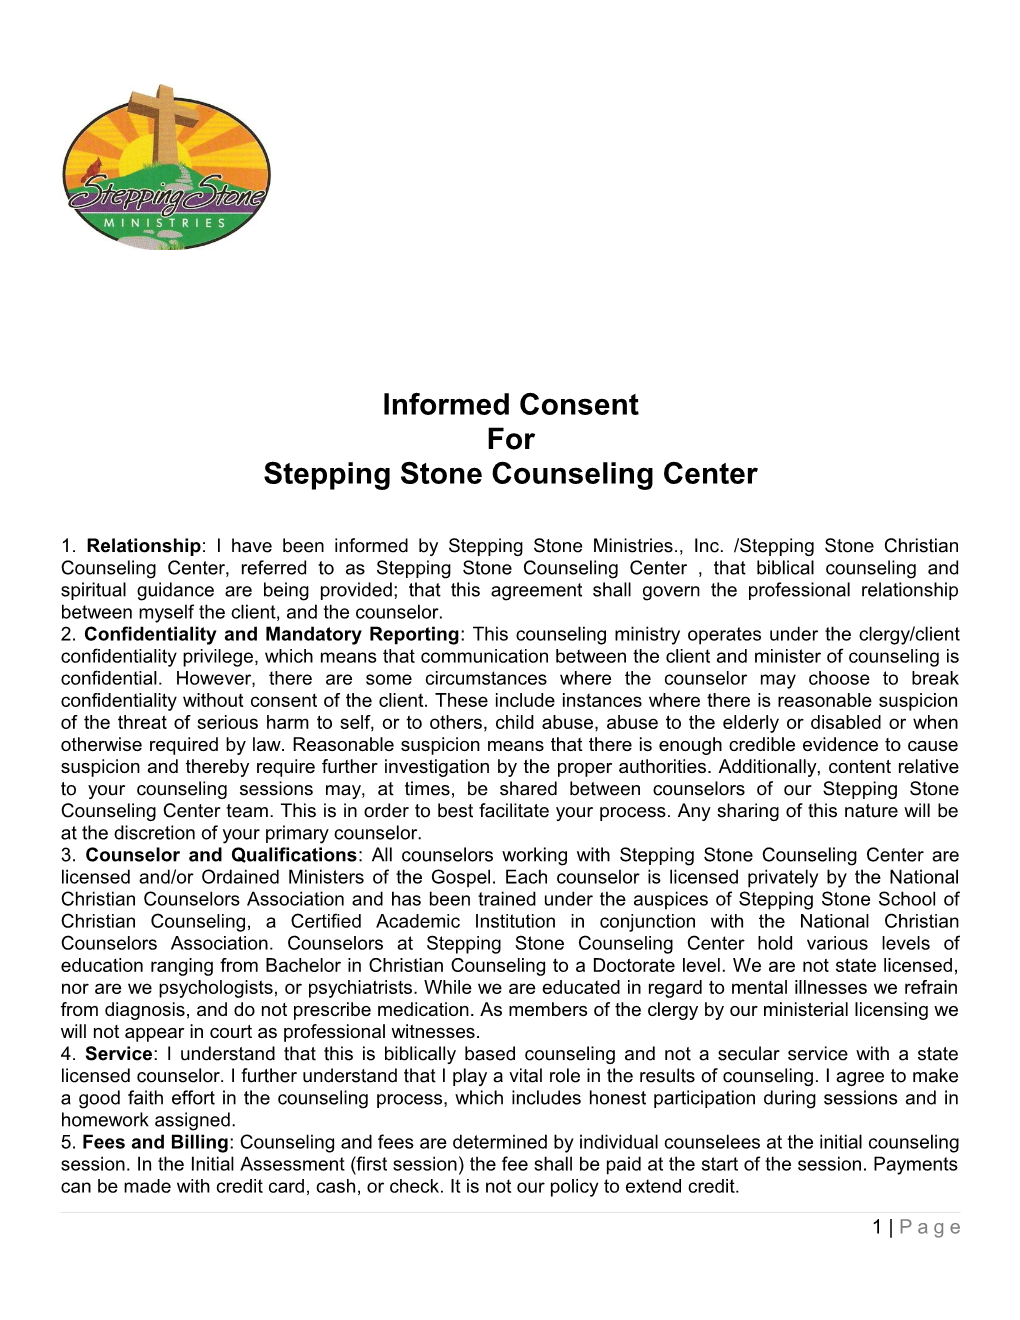 Stepping Stone Counseling Center